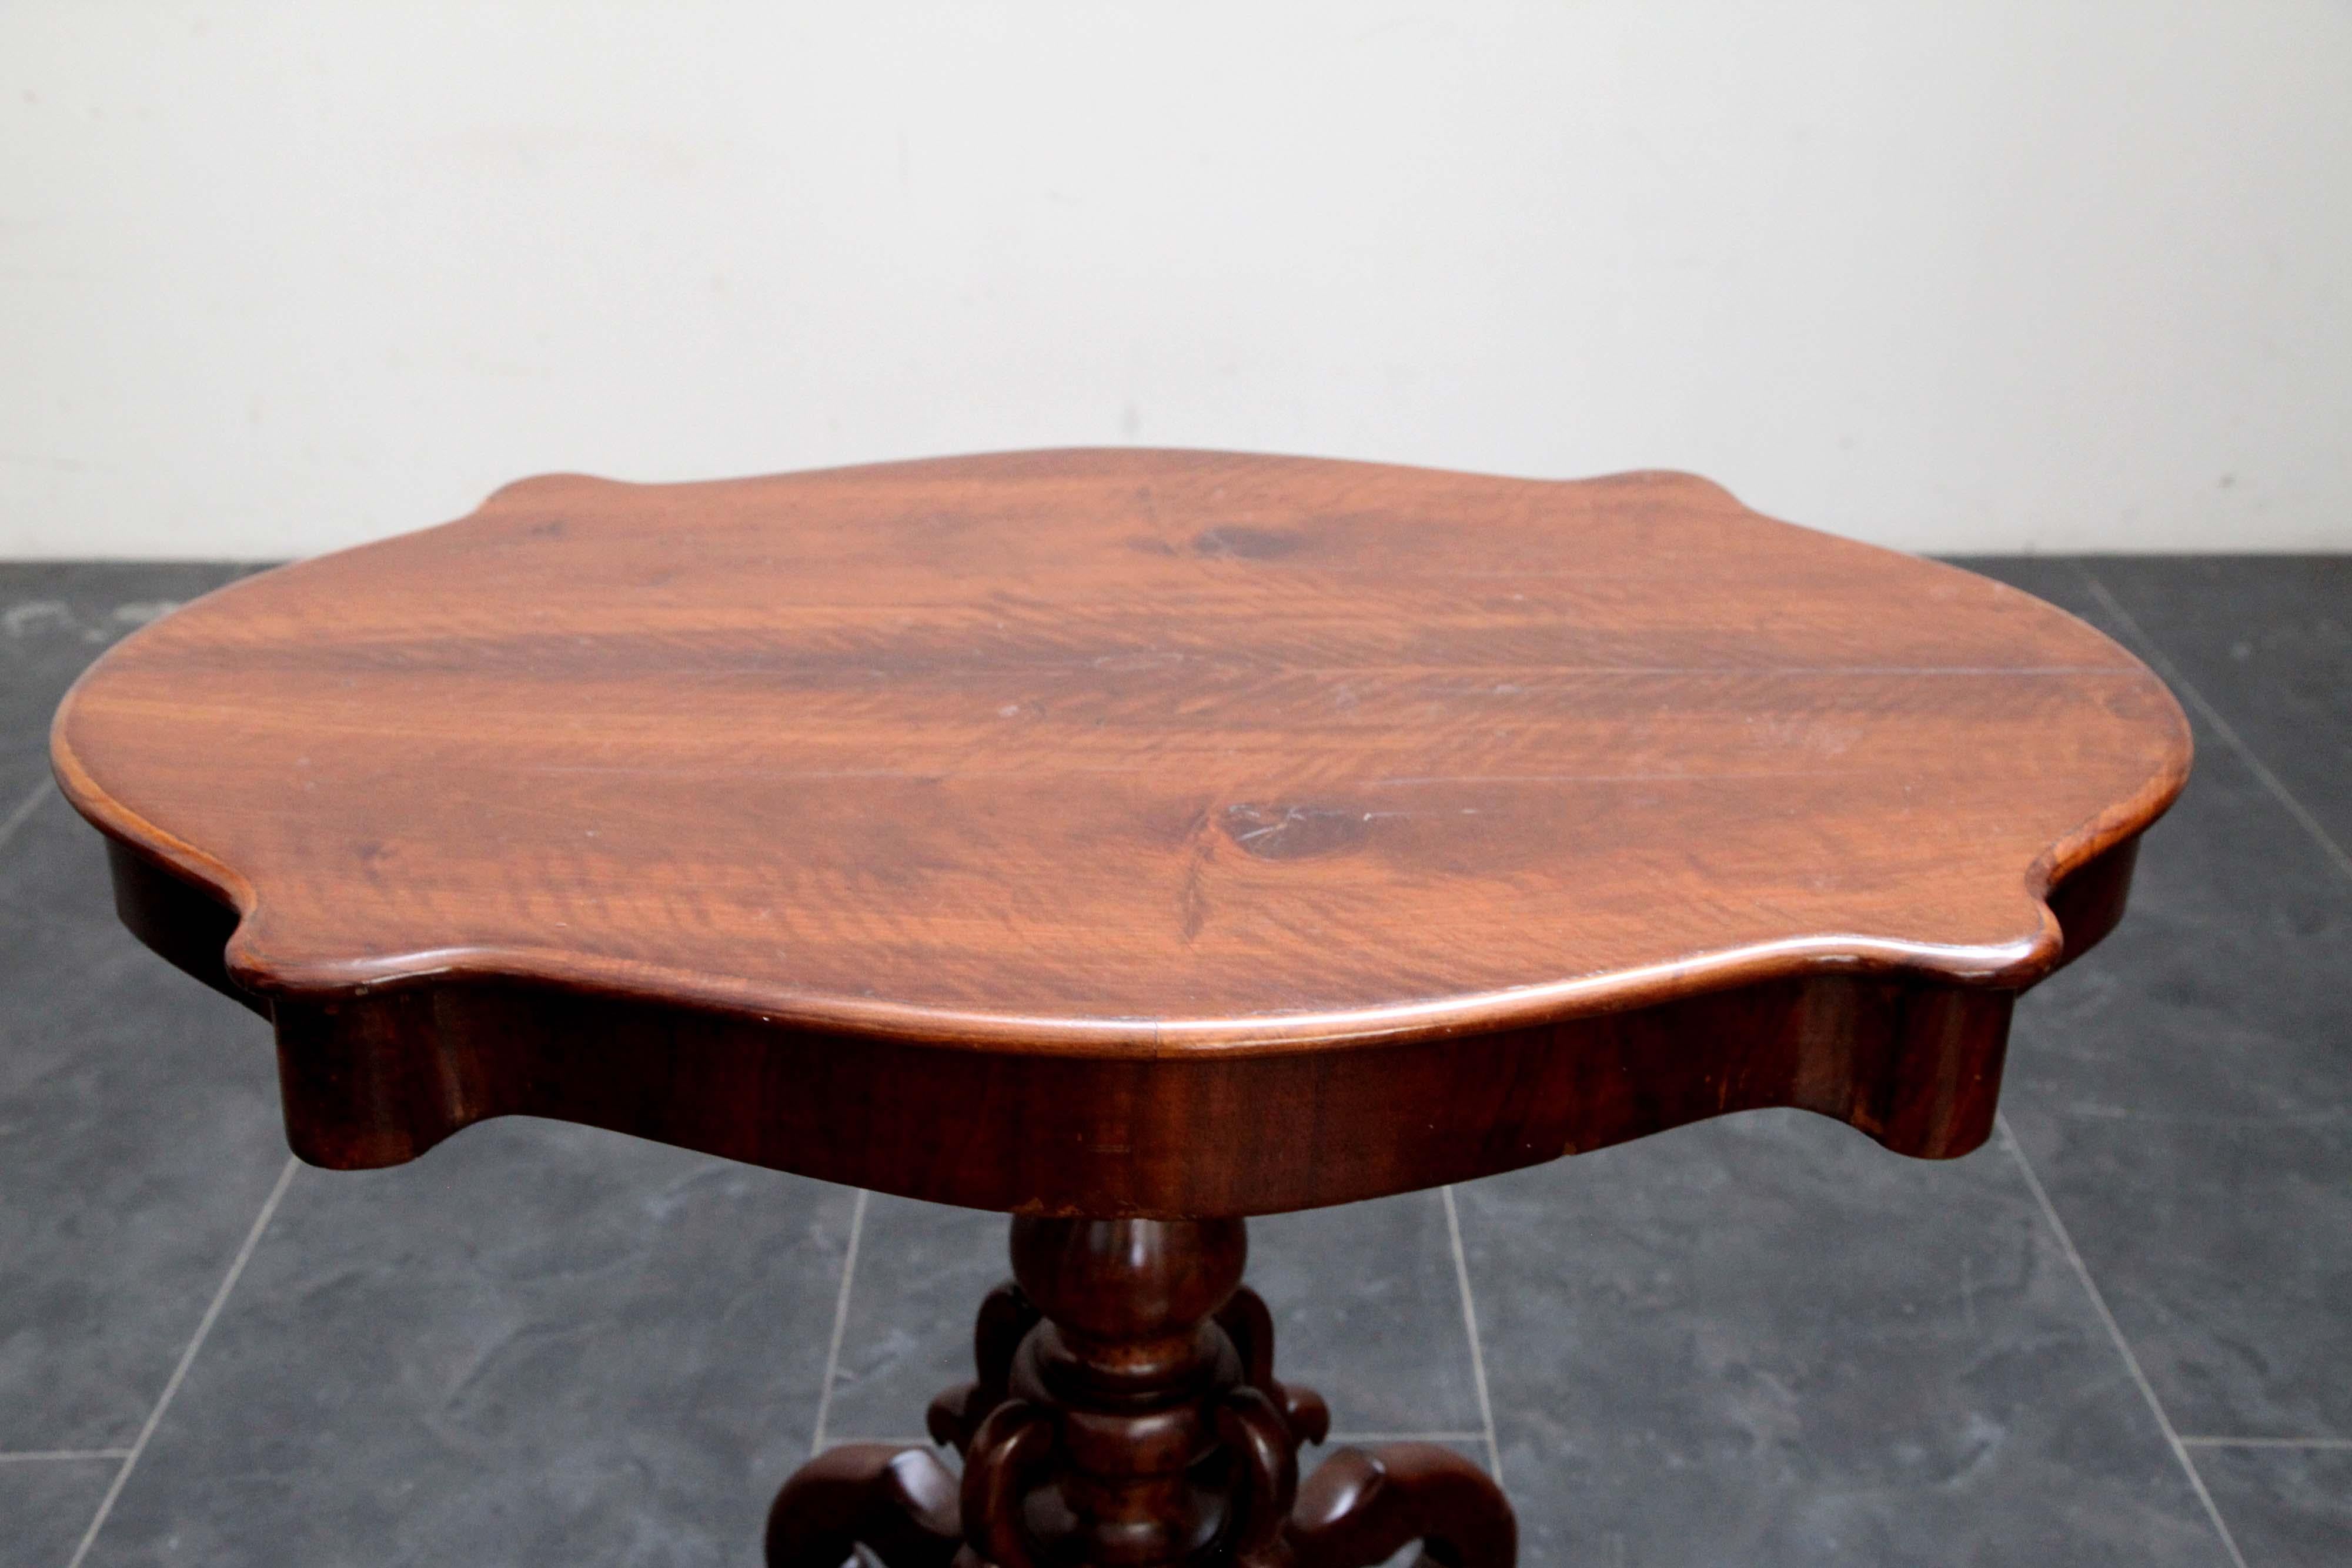 Charles X table in solid cherry wood, 4 wavy, finely carved supports connect with the central trunk carved in a twist shape, the whole holds up a top which, gracefully shaped, forms an oval.
Packaging with bubble wrap and cardboard boxes is